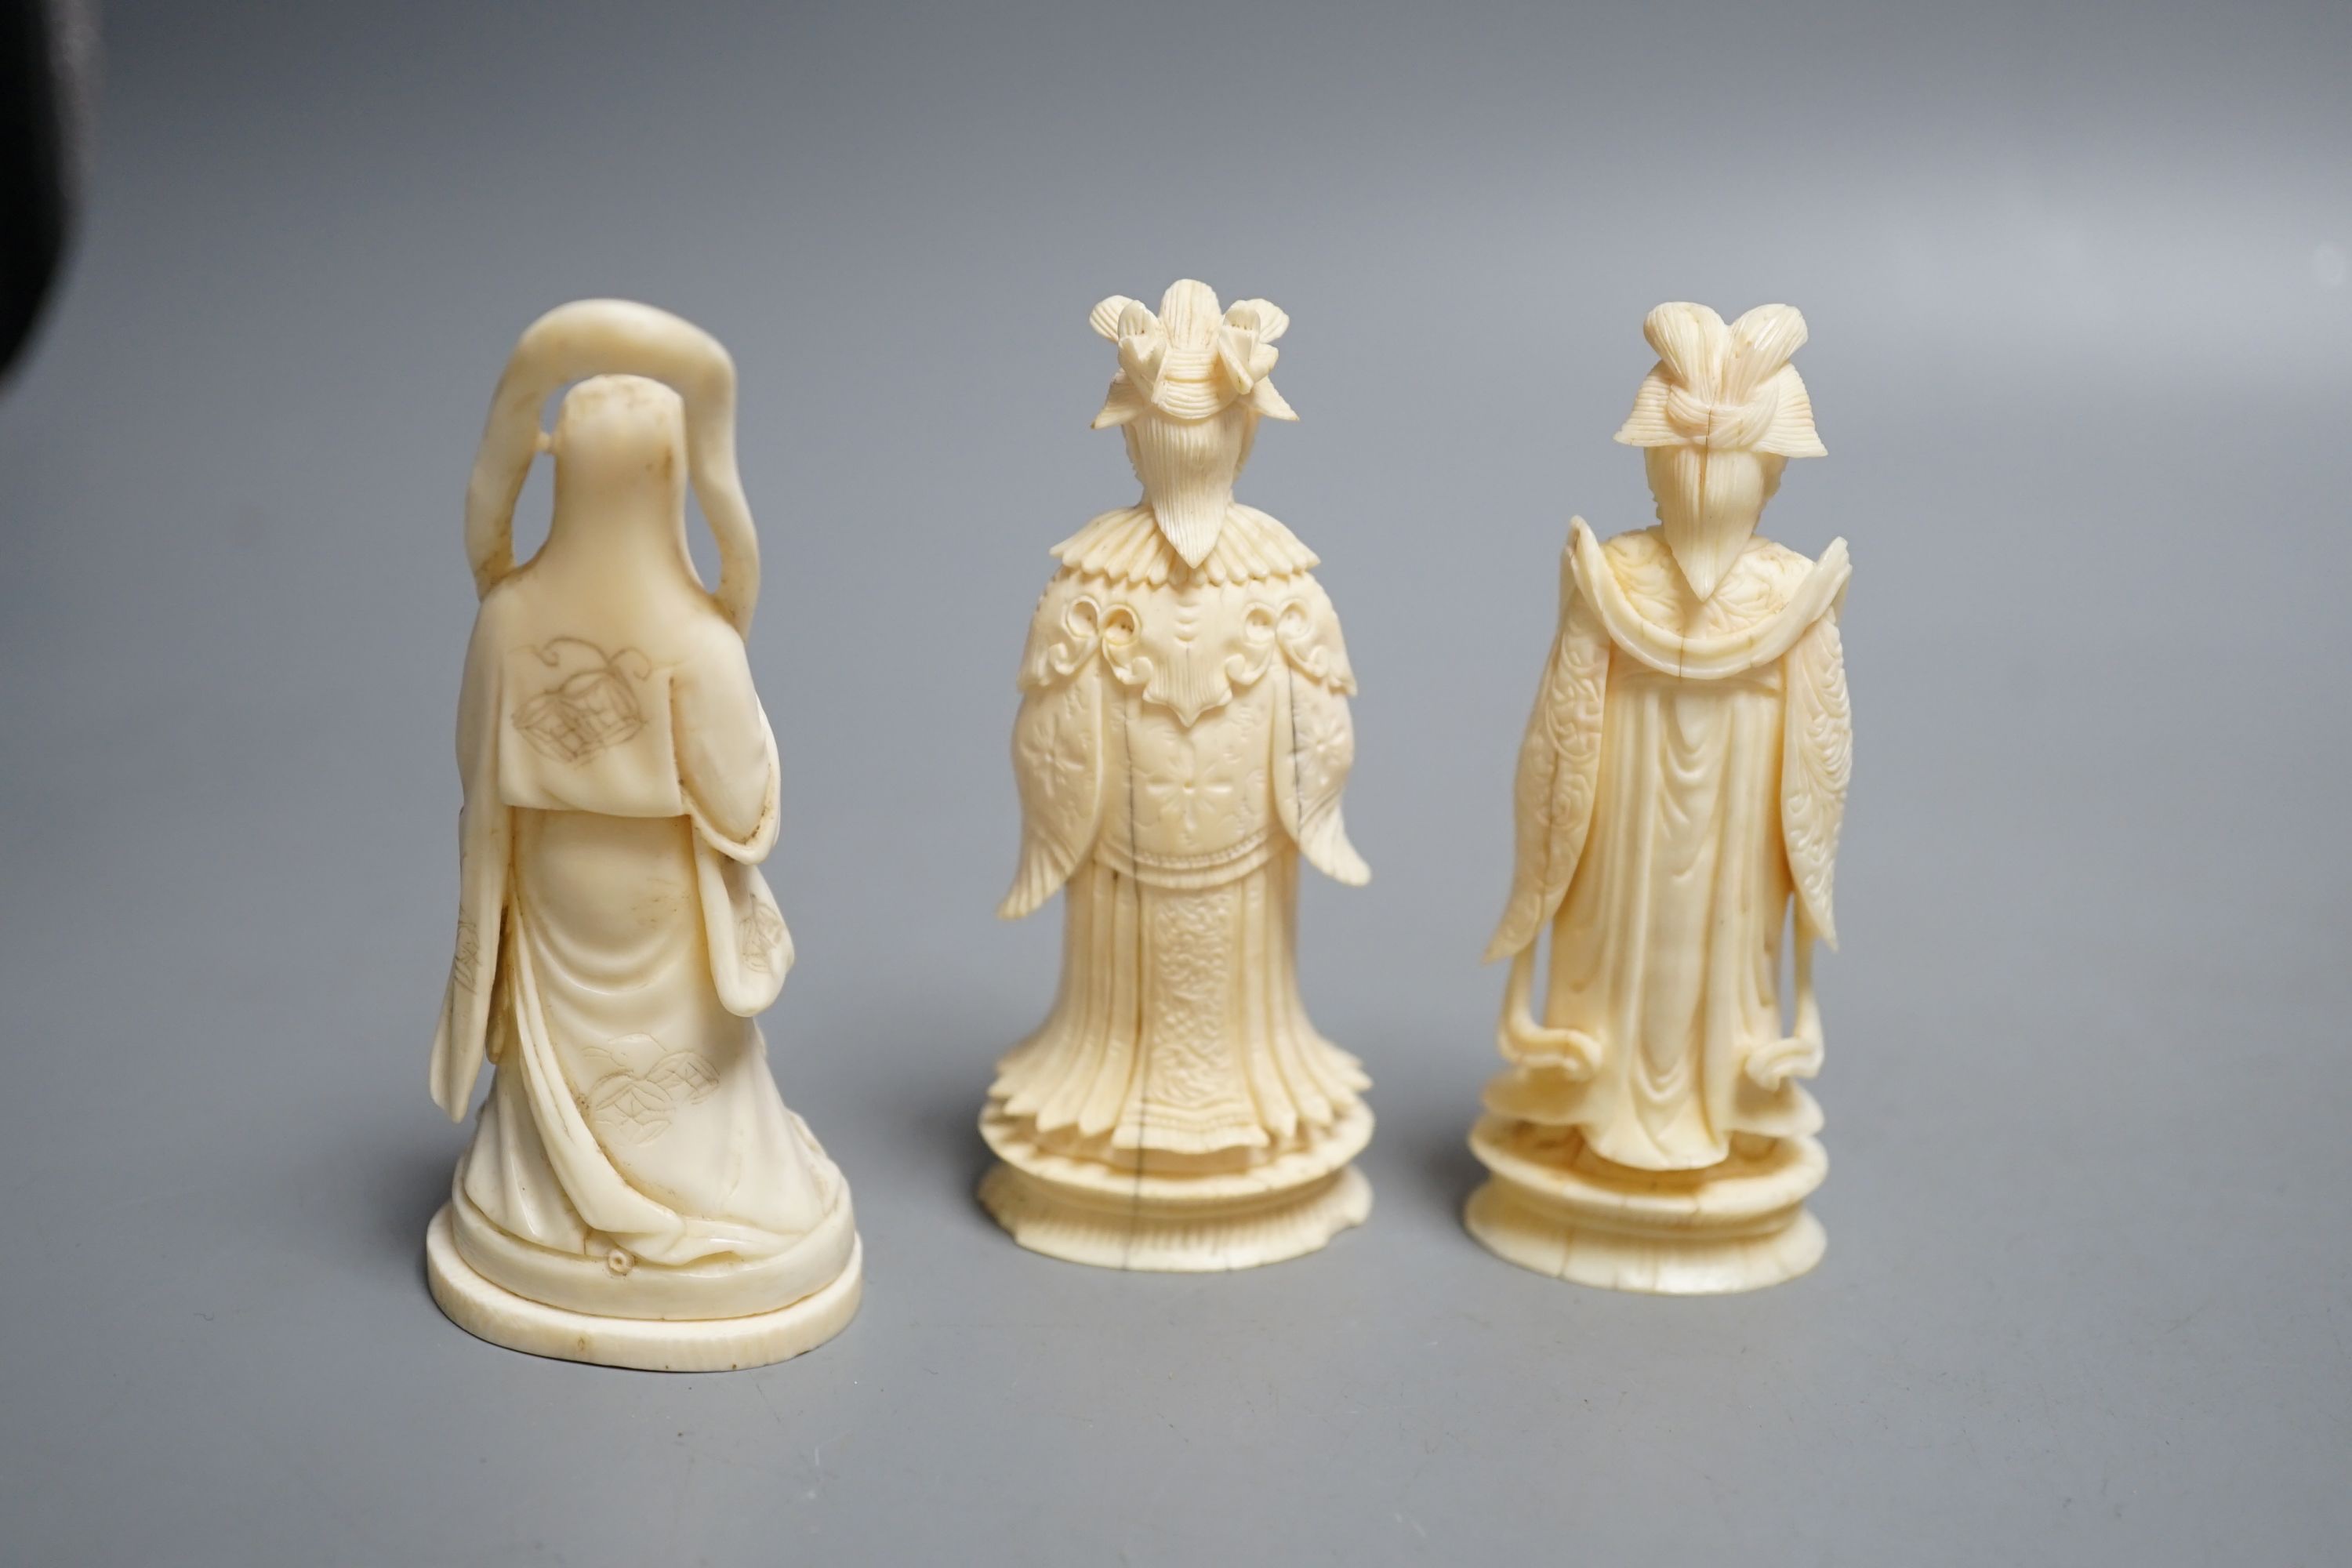 A Chinese ivory figure of Guanyin, a pair of ivory chess pieces, two Cantonese napkin rings and a Cantonese ivory plaque with flowers, 19th/early 20th century , tallest chess piece 8.5 cms high.